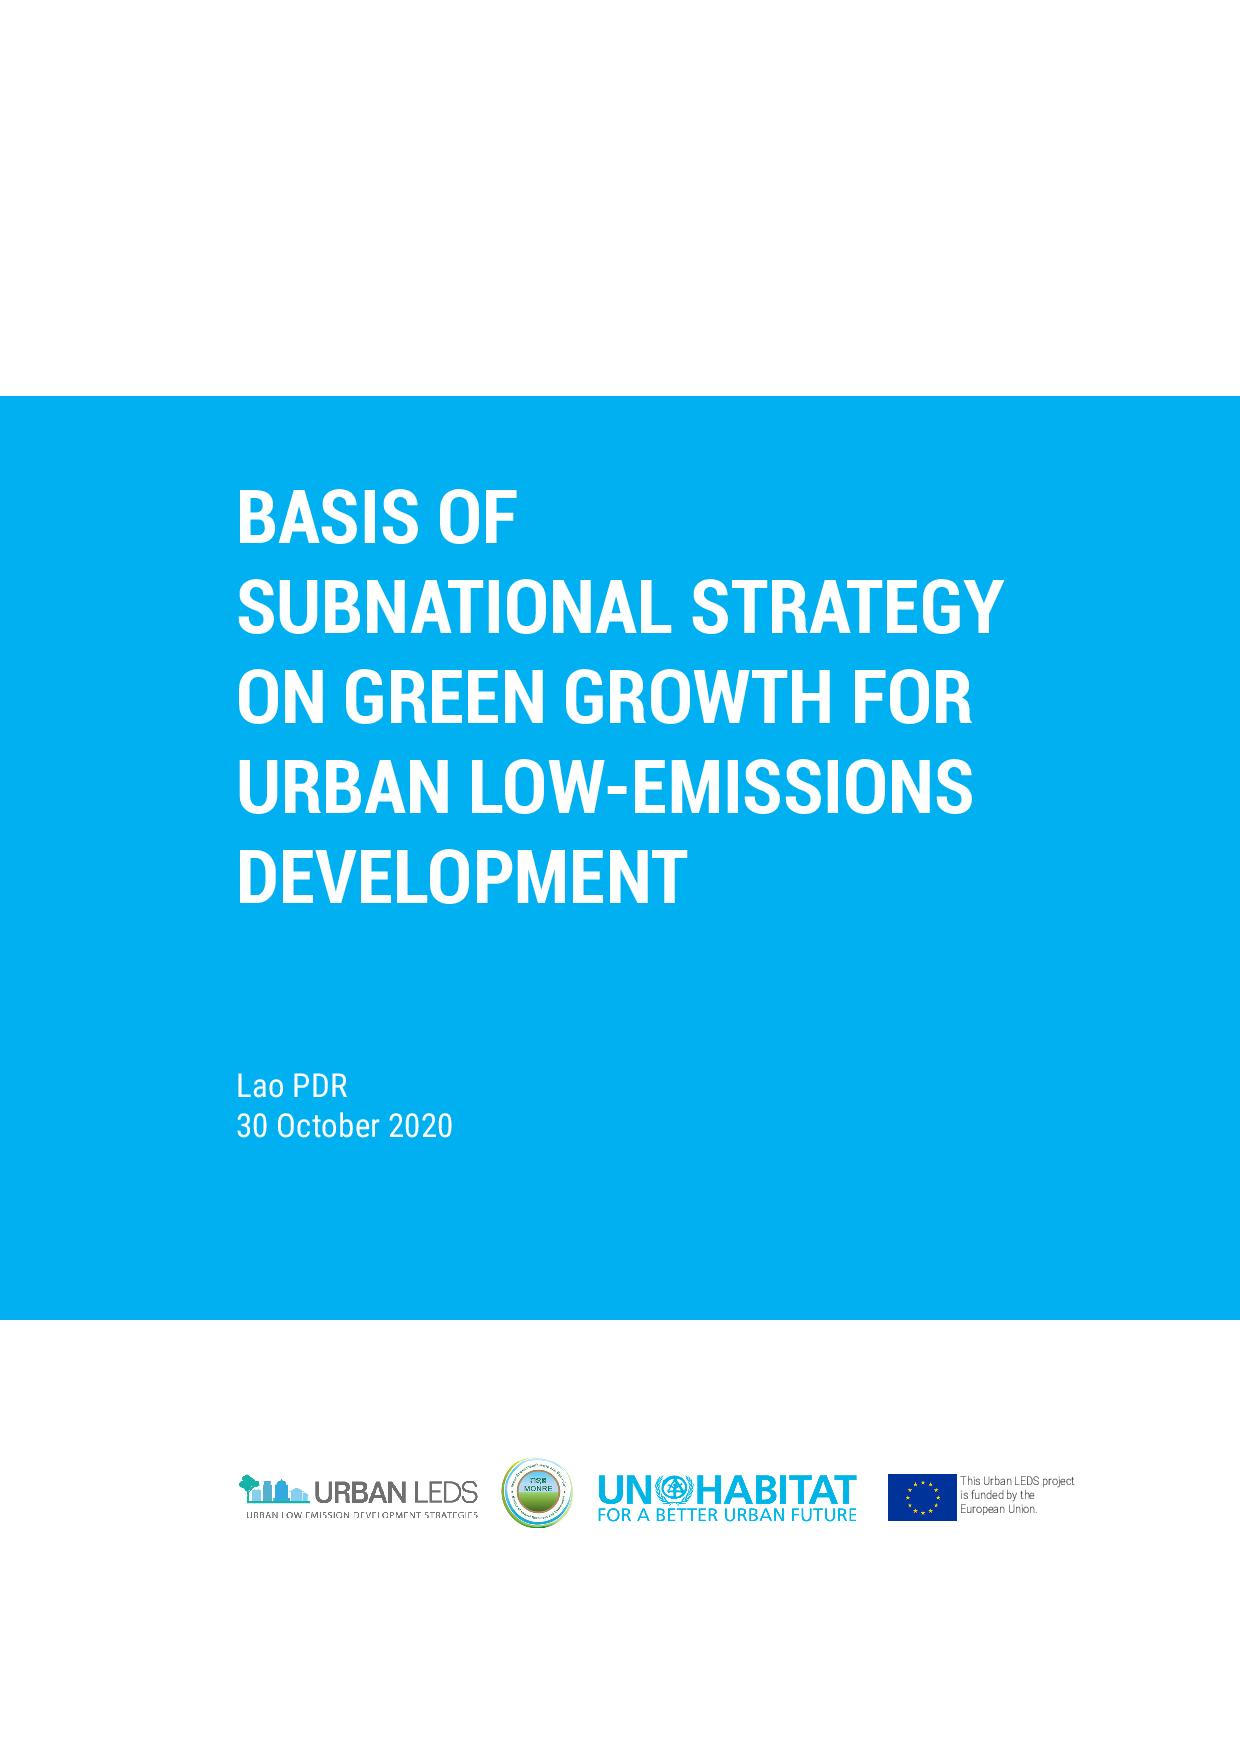 Basis of Subnational Strategy on Green Growth for Urban Low-Emission Development, Lao PDR (2020)